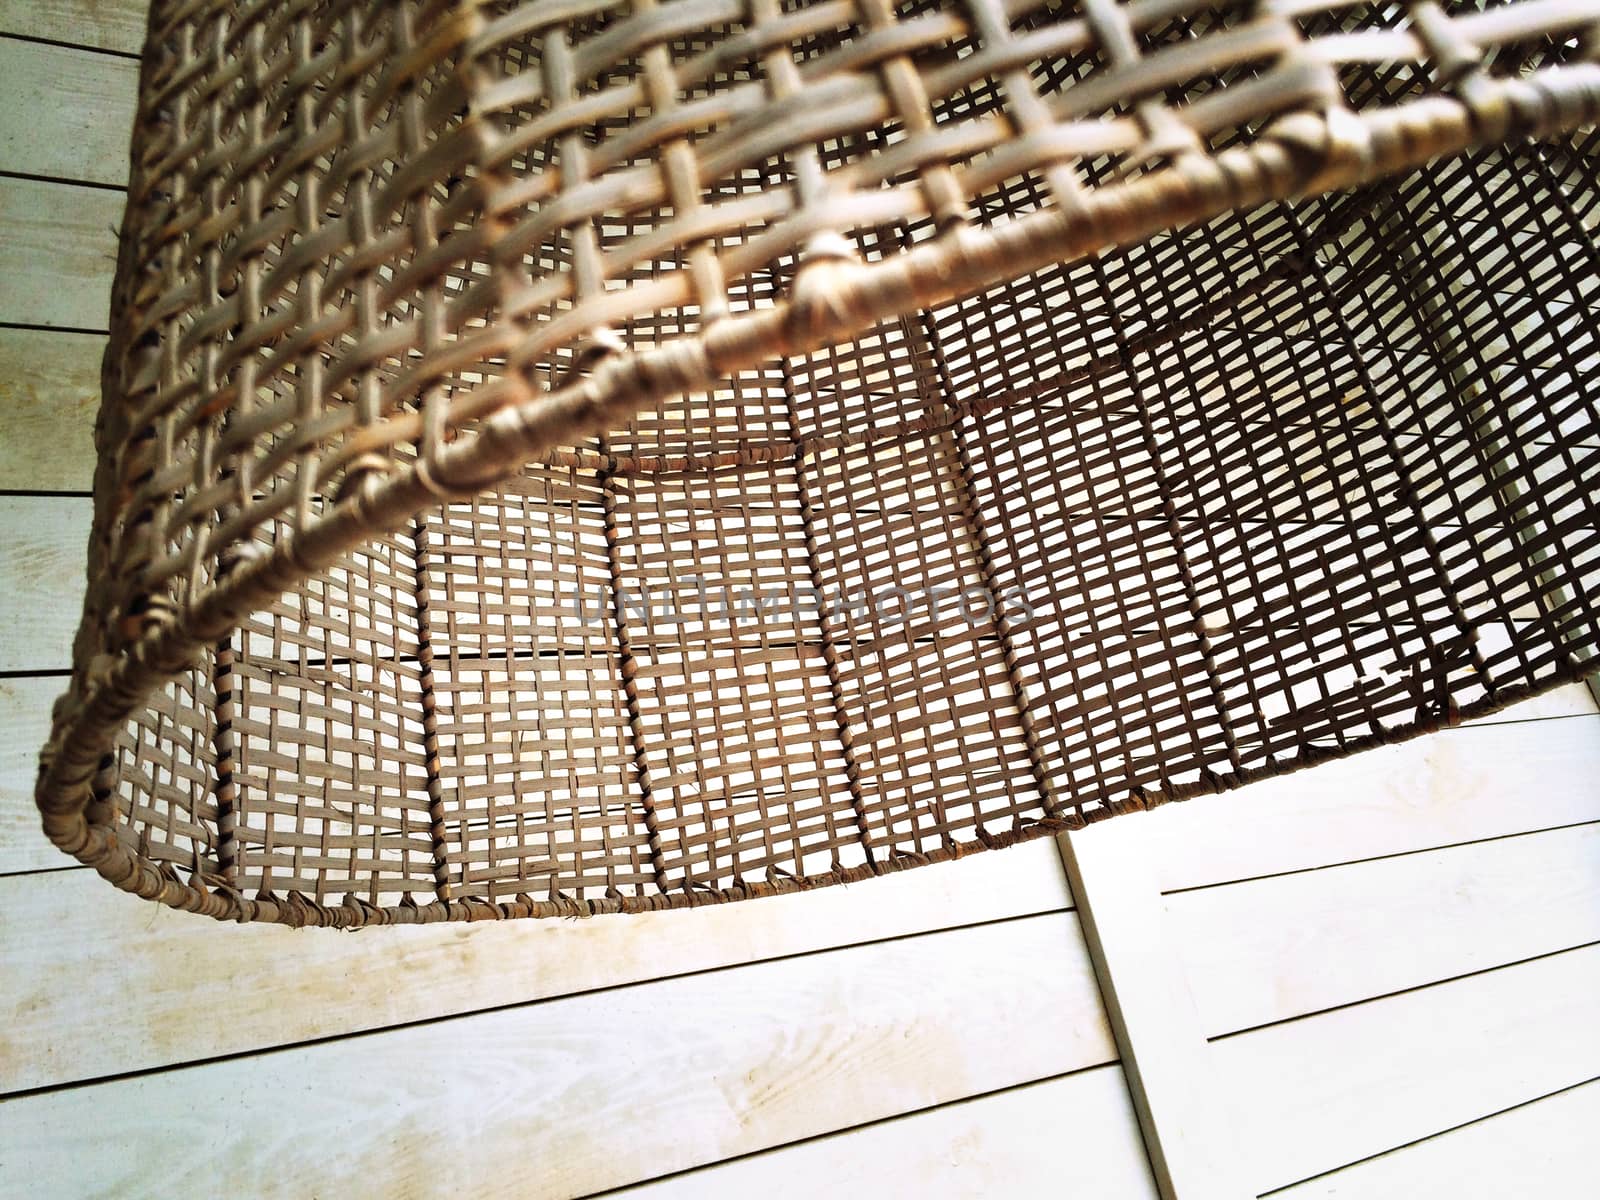 Detail of wicker lampshade, rustic style.